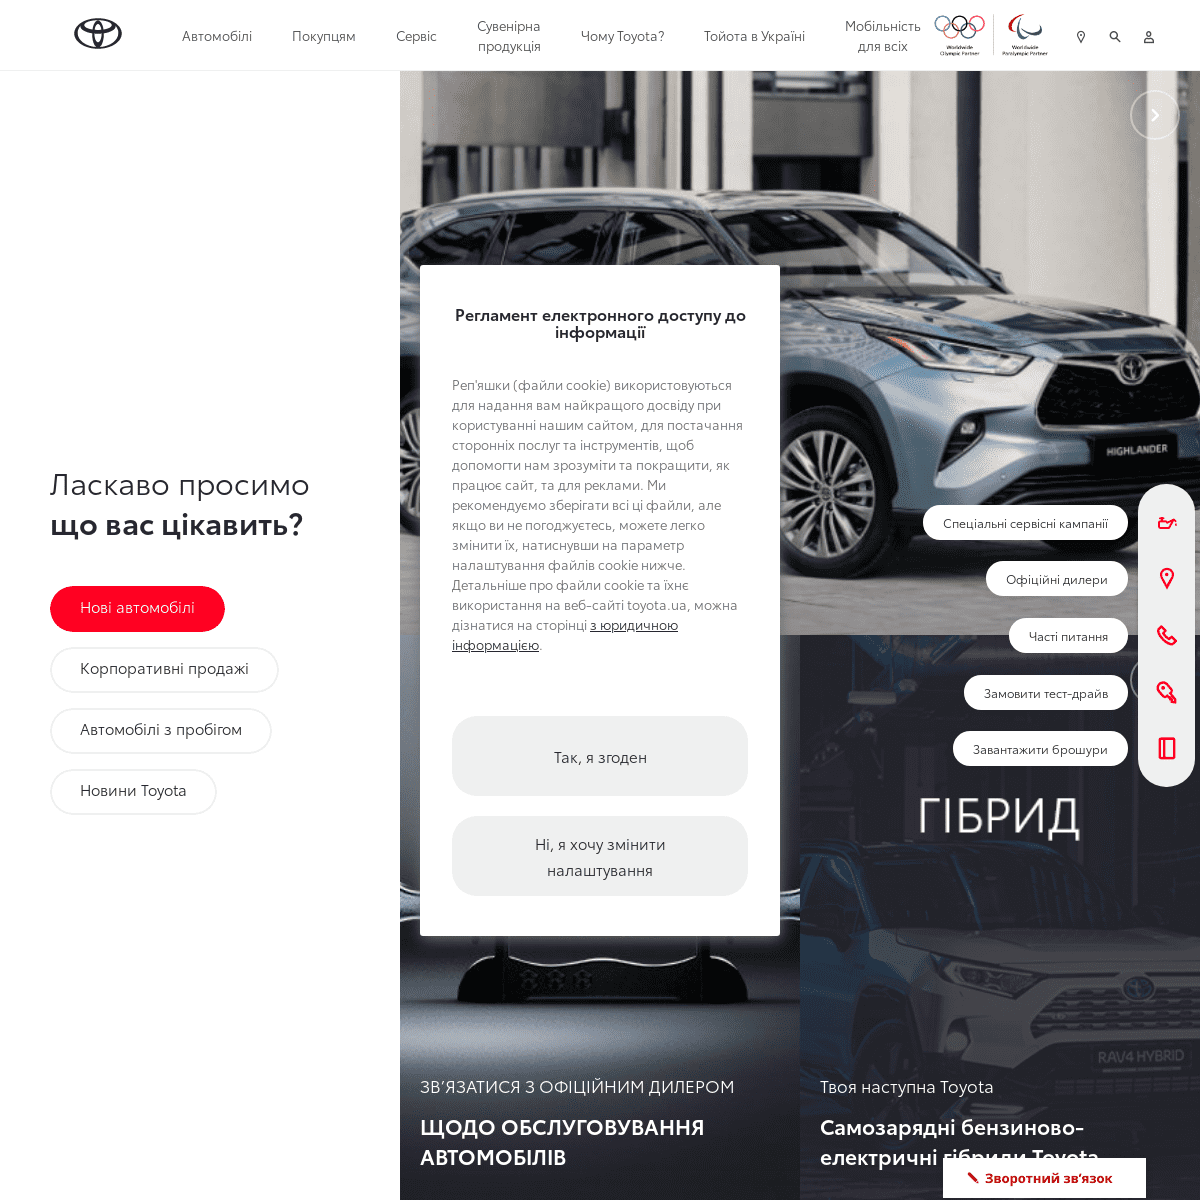 A complete backup of https://toyota.ua